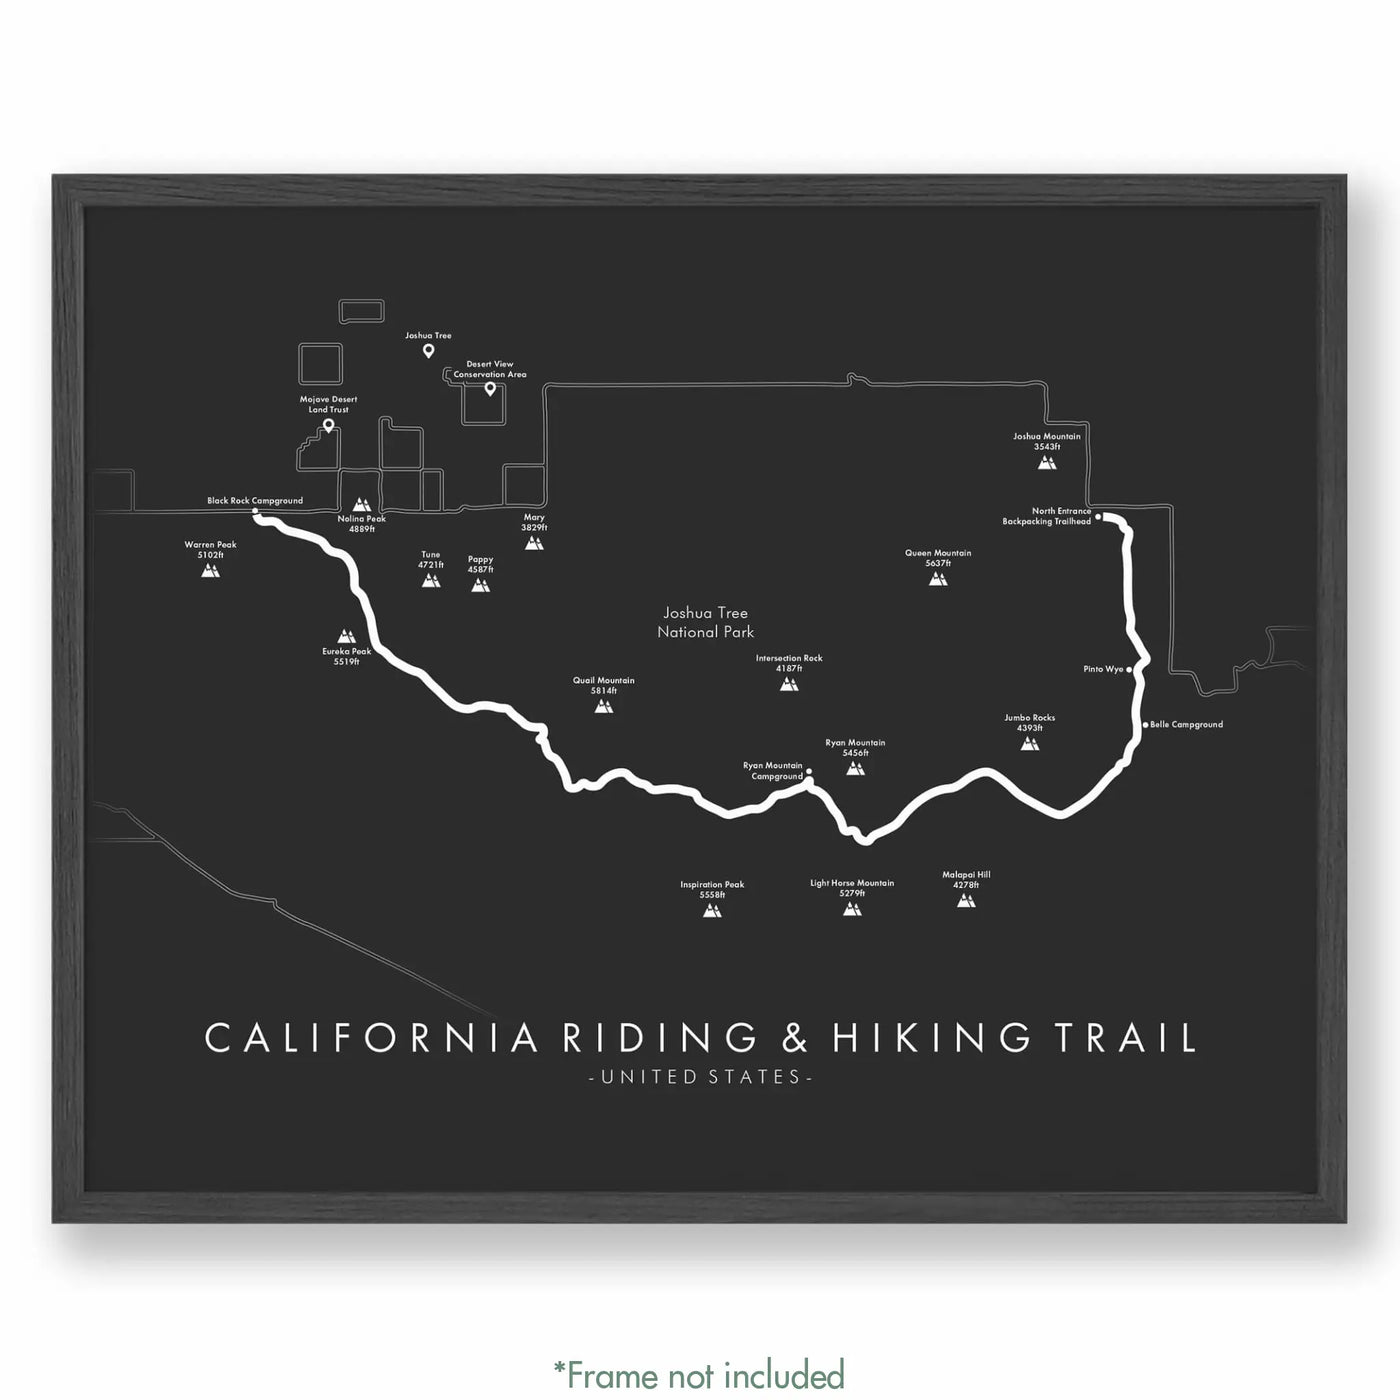 Trail Poster of California Riding & Hiking Trail - Grey